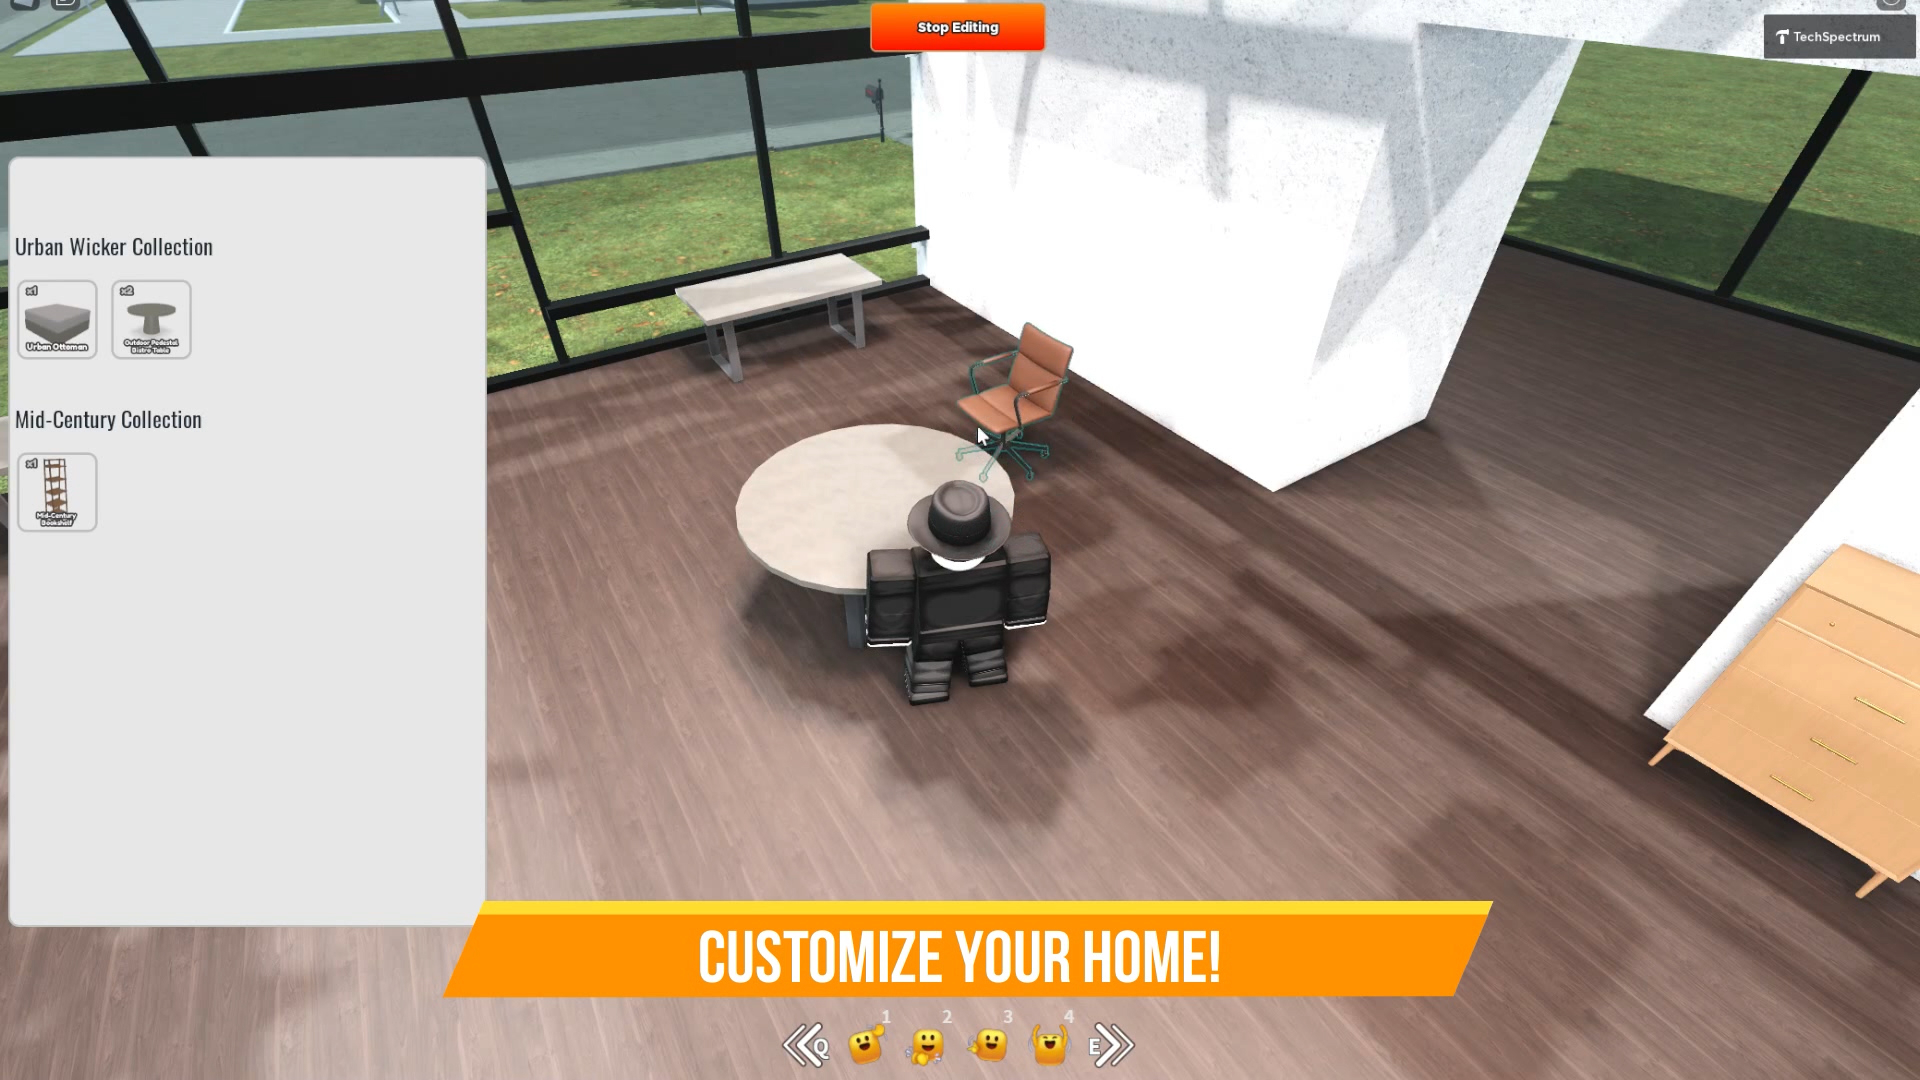 The West Elm Home Design Experience Launches on Roblox